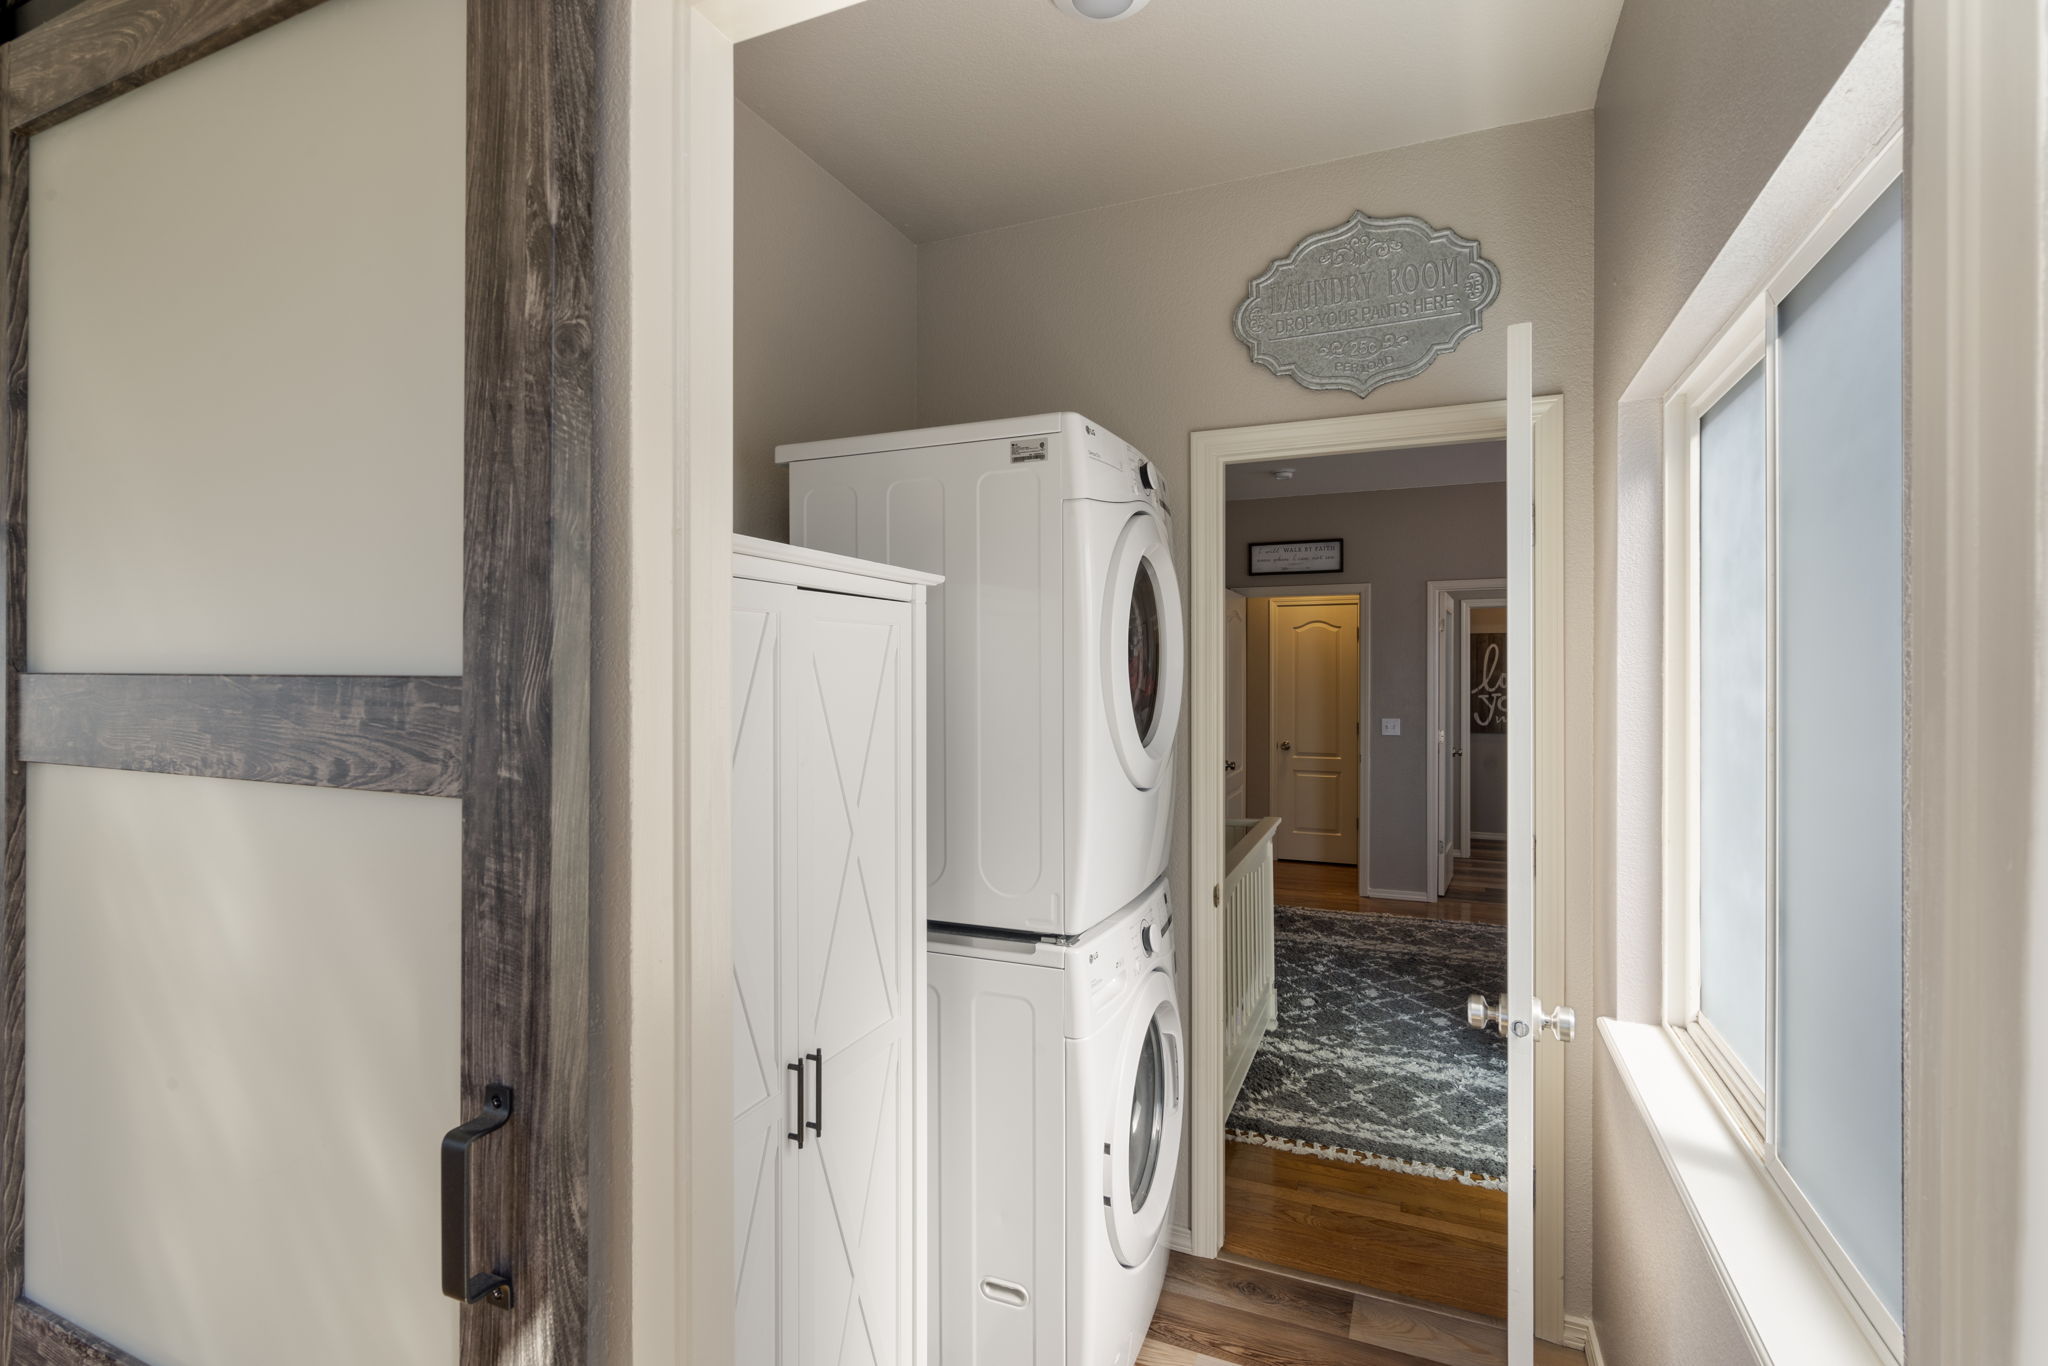 Laundry has barn door, armoire and stackable Washer/Dryer stay!